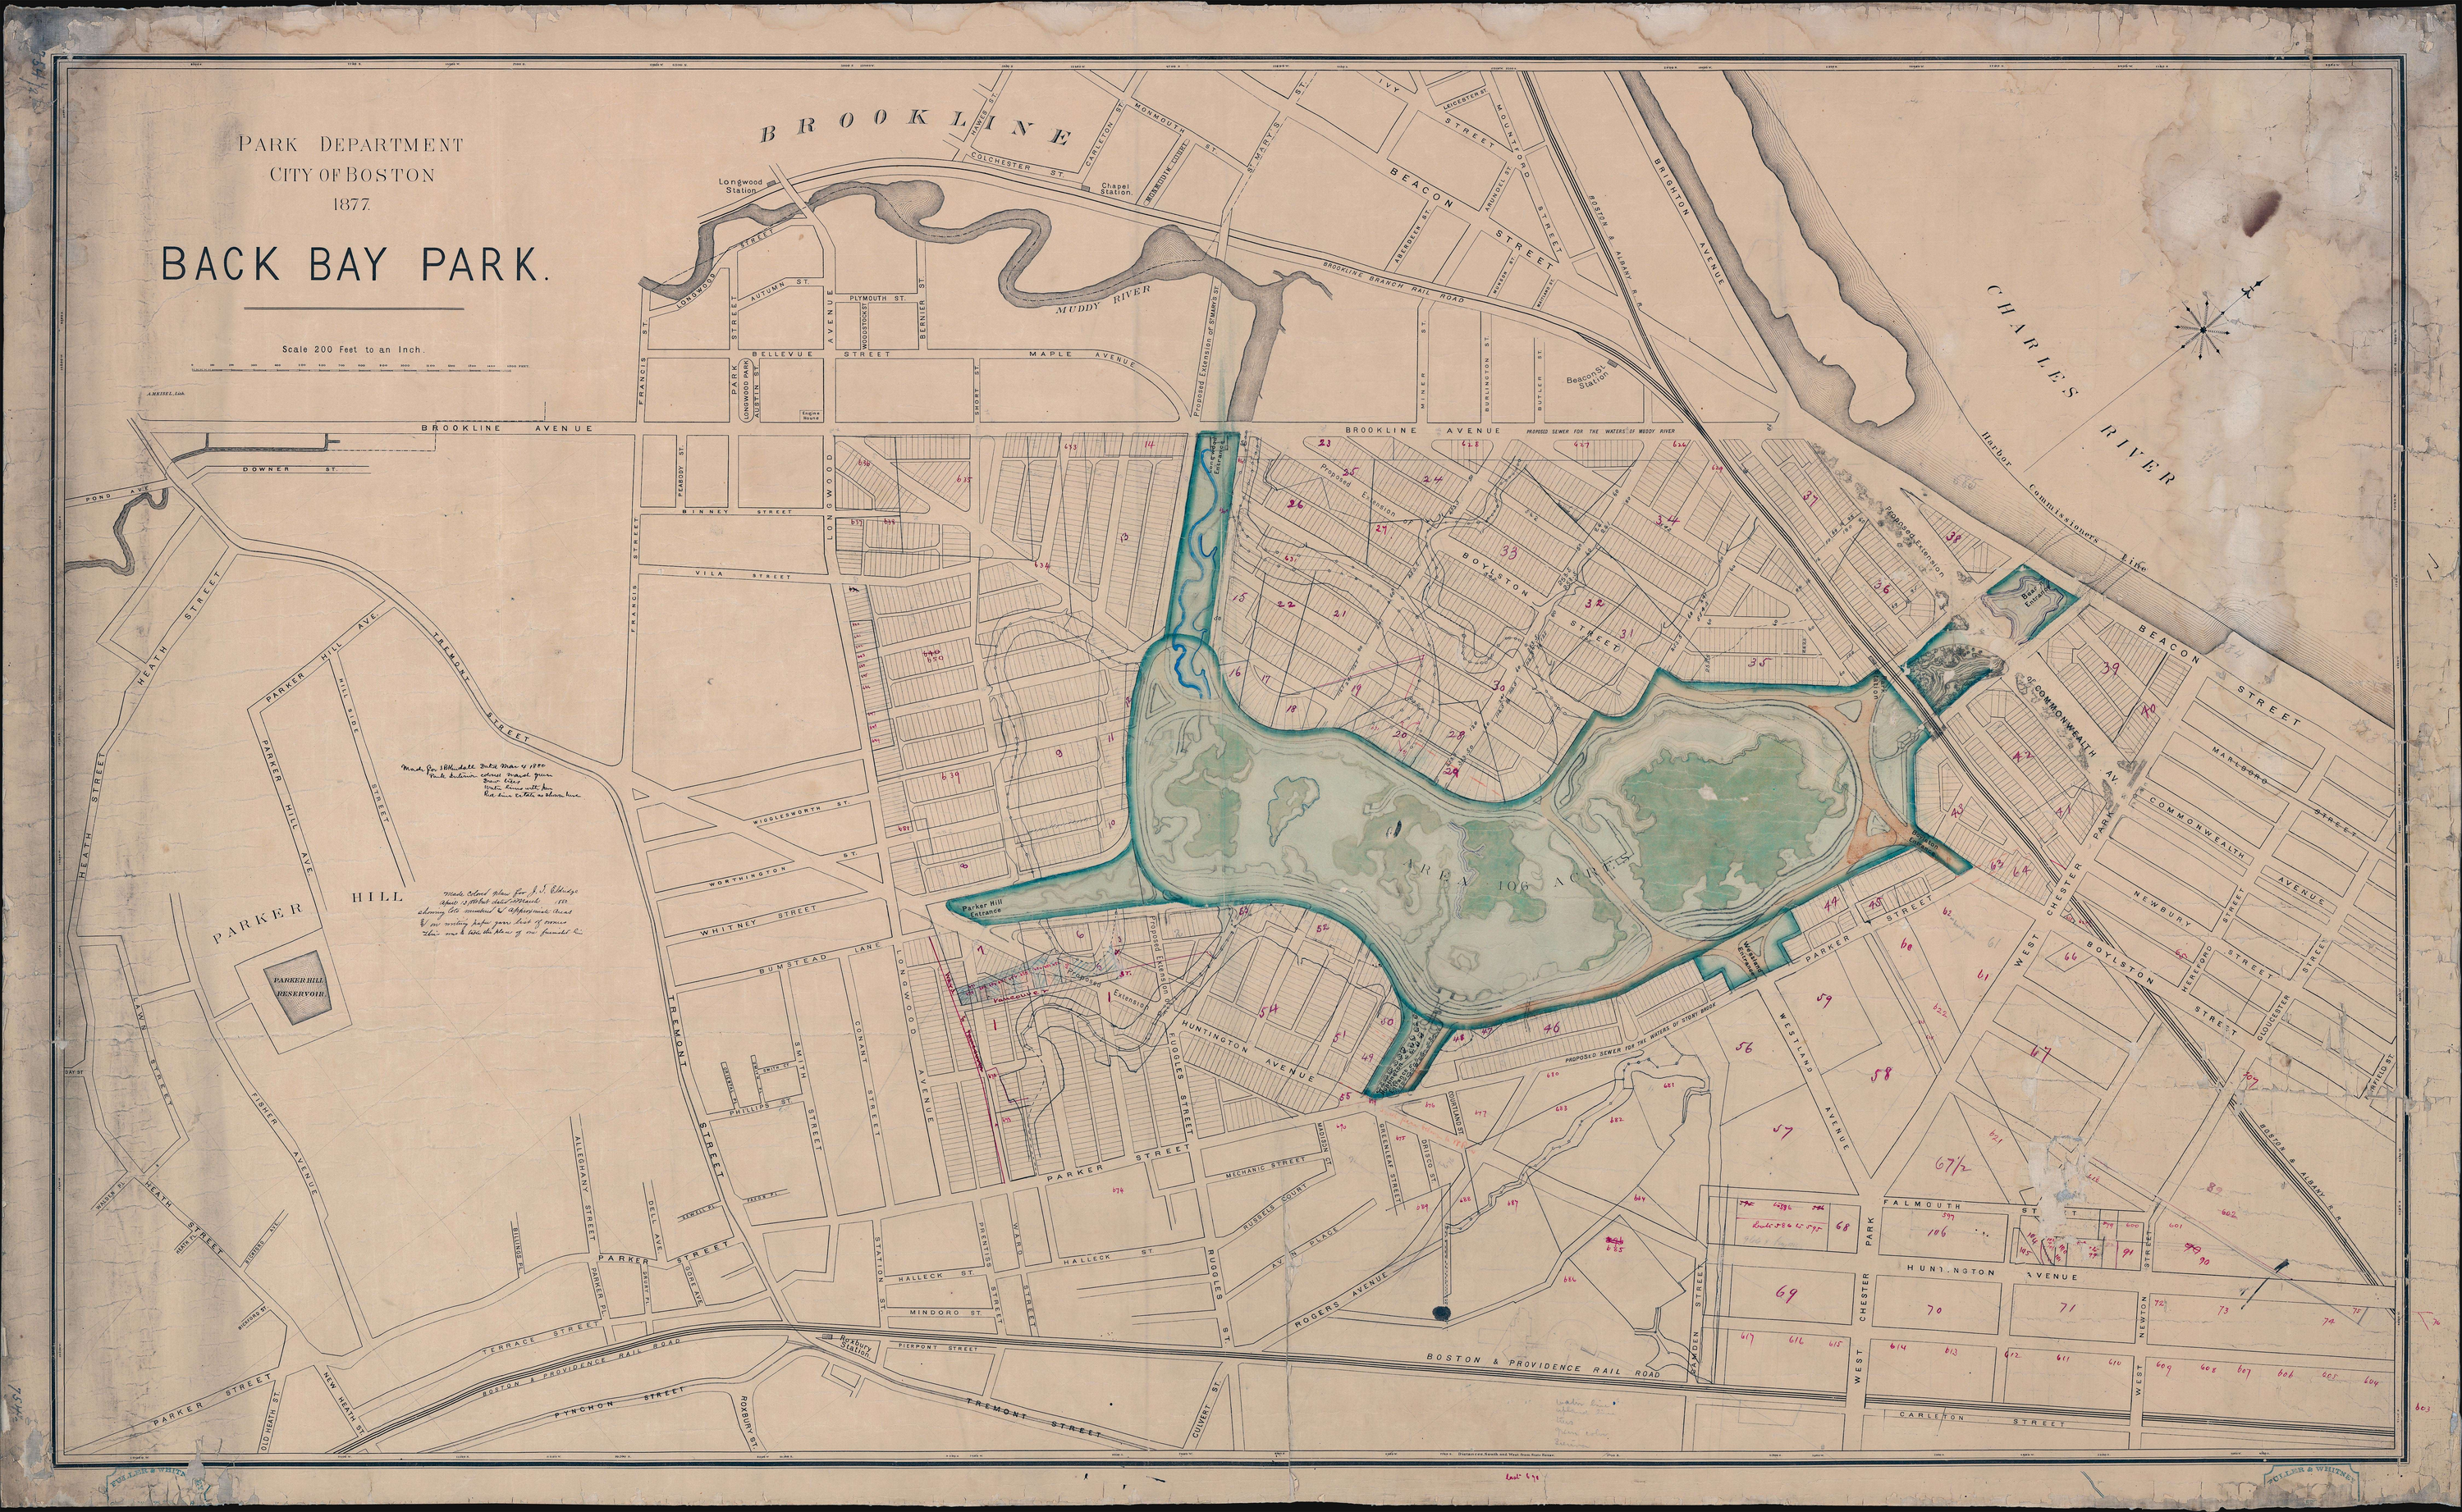 This 1880 planning map of Back Bay Park shows landscape designs that don&rsquo;t appear on any other maps of this period.